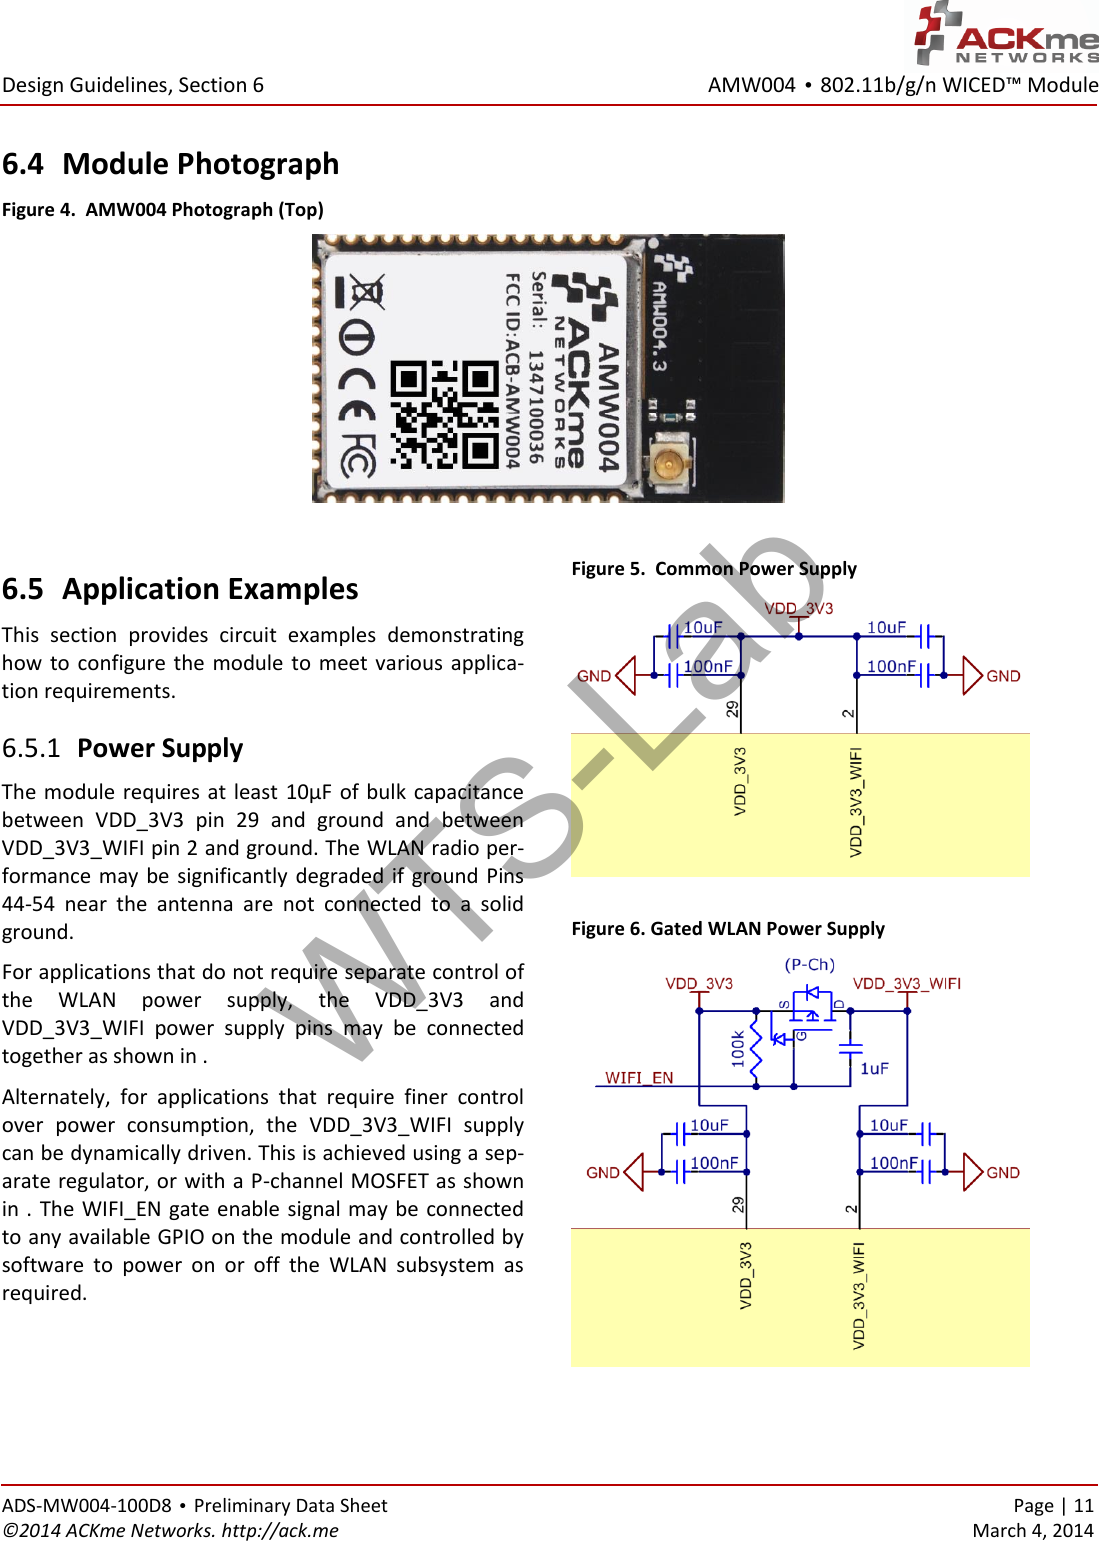 AMW004 • 802.11b/g/n WICED™ Module  Design Guidelines, Section 6 ADS-MW004-100D8 • Preliminary Data Sheet    Page | 11 ©2014 ACKme Networks. http://ack.me    March 4, 2014 6.4 Module Photograph Figure 4.  AMW004 Photograph (Top)   6.5 Application Examples This  section  provides  circuit  examples  demonstrating how  to  configure the  module to  meet  various  applica-tion requirements.  Power Supply 6.5.1The module requires at least 10µF of bulk capacitance between  VDD_3V3  pin  29  and  ground  and  between VDD_3V3_WIFI pin 2 and ground. The WLAN radio per-formance may be significantly degraded if ground Pins 44-54  near  the  antenna  are  not  connected  to  a  solid ground. For applications that do not require separate control of the  WLAN  power  supply,  the  VDD_3V3  and VDD_3V3_WIFI  power  supply  pins  may  be  connected together as shown in . Alternately,  for  applications  that  require  finer  control over  power  consumption,  the  VDD_3V3_WIFI  supply can be dynamically driven. This is achieved using a sep-arate regulator, or with a P-channel MOSFET as shown in . The WIFI_EN gate enable signal may be connected to any available GPIO on the module and controlled by software  to  power  on  or  off  the  WLAN  subsystem  as required.  Figure 5.  Common Power Supply   Figure 6. Gated WLAN Power Supply  WTS-Lab